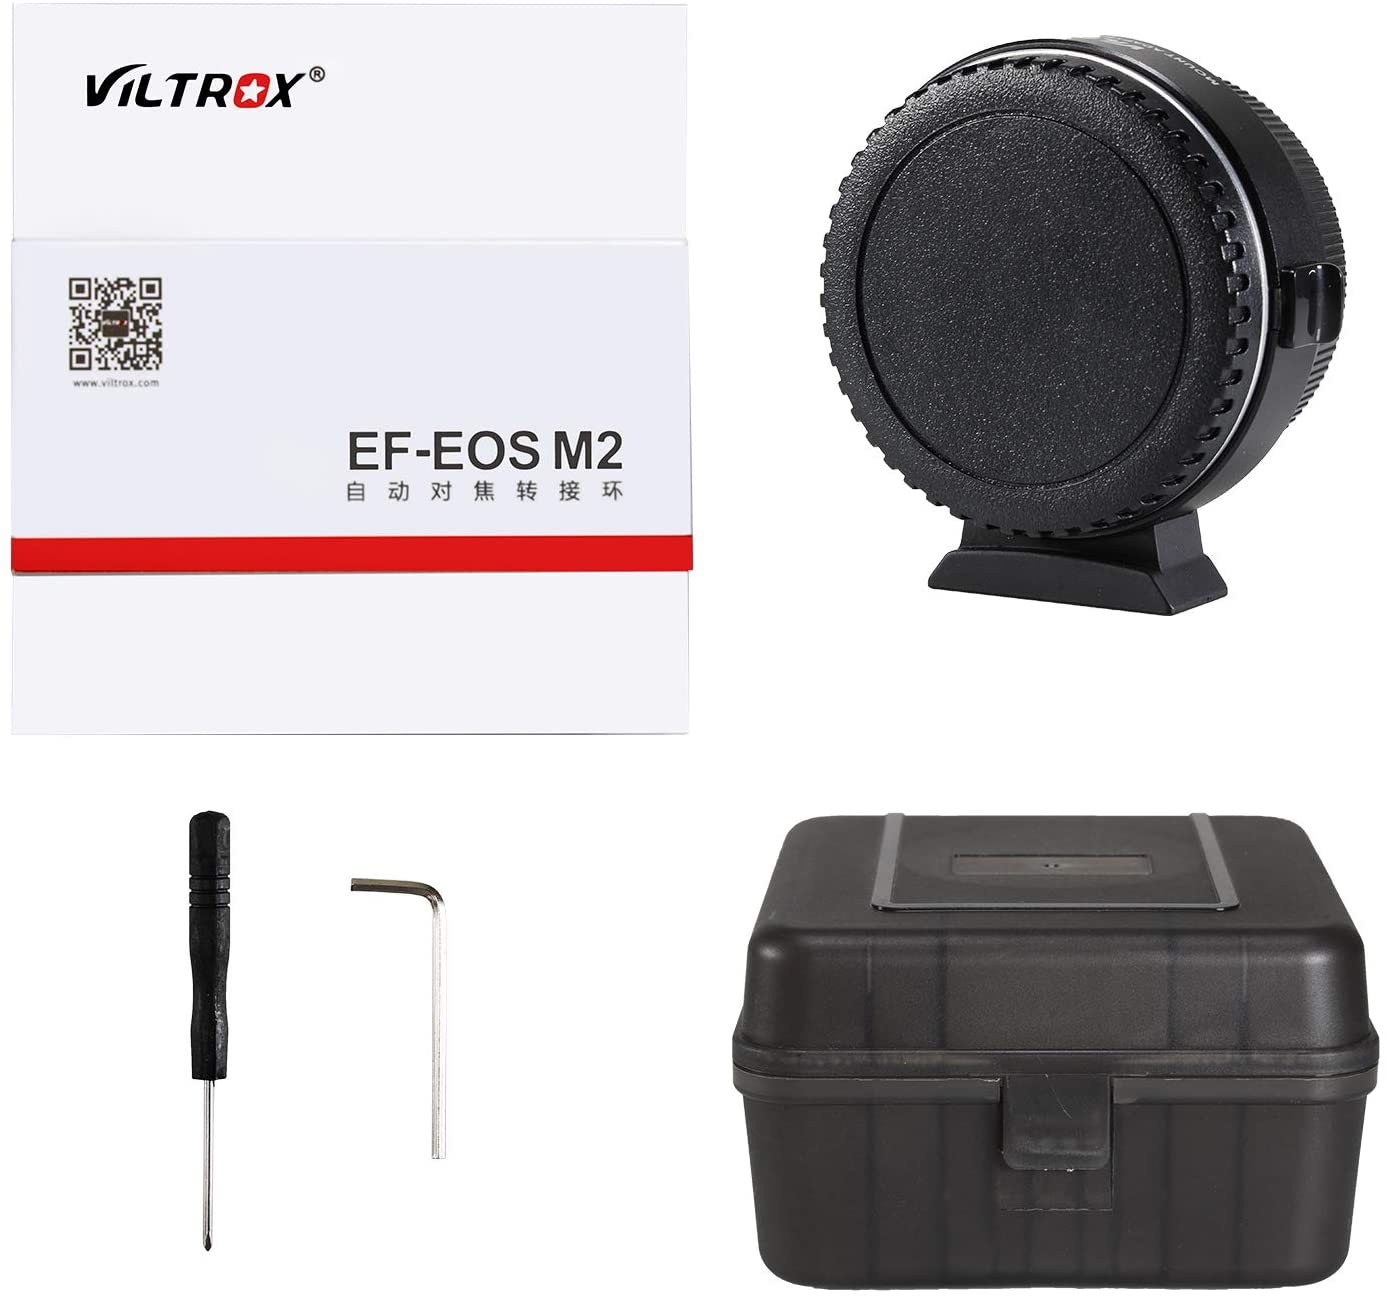 Viltrox EF-EOS M2 0.71x Speed Booster Camera Lens Adapter for Canon EF-Mount Lenses to EF-M-Mount Mirrorless Cameras